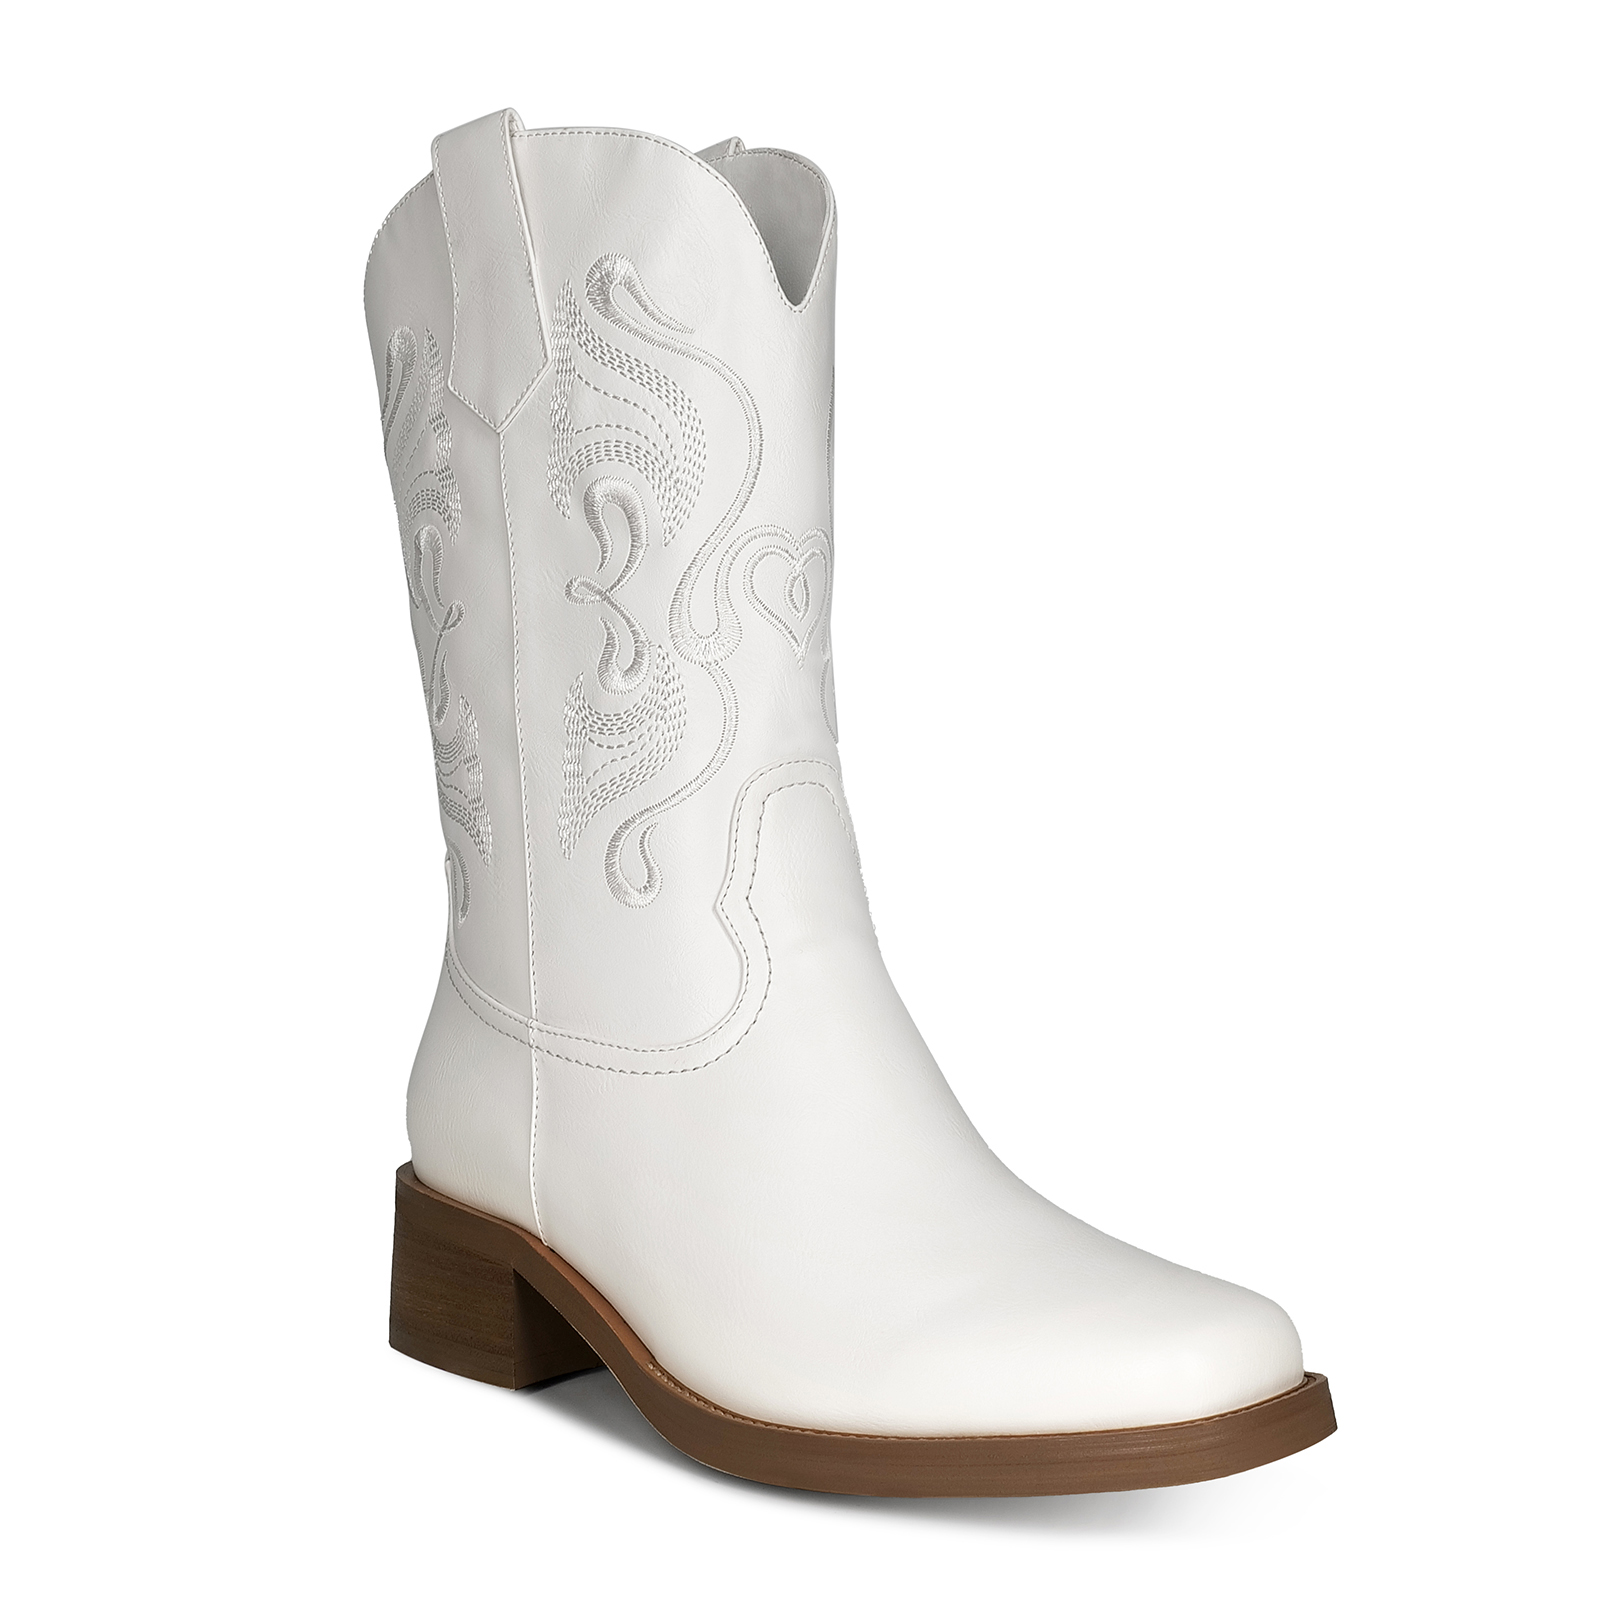 TAAFO Shoe Girls Western Boots Flat Heels Mid Calf Boots Round Toe White Cowboy Boots For Wedding